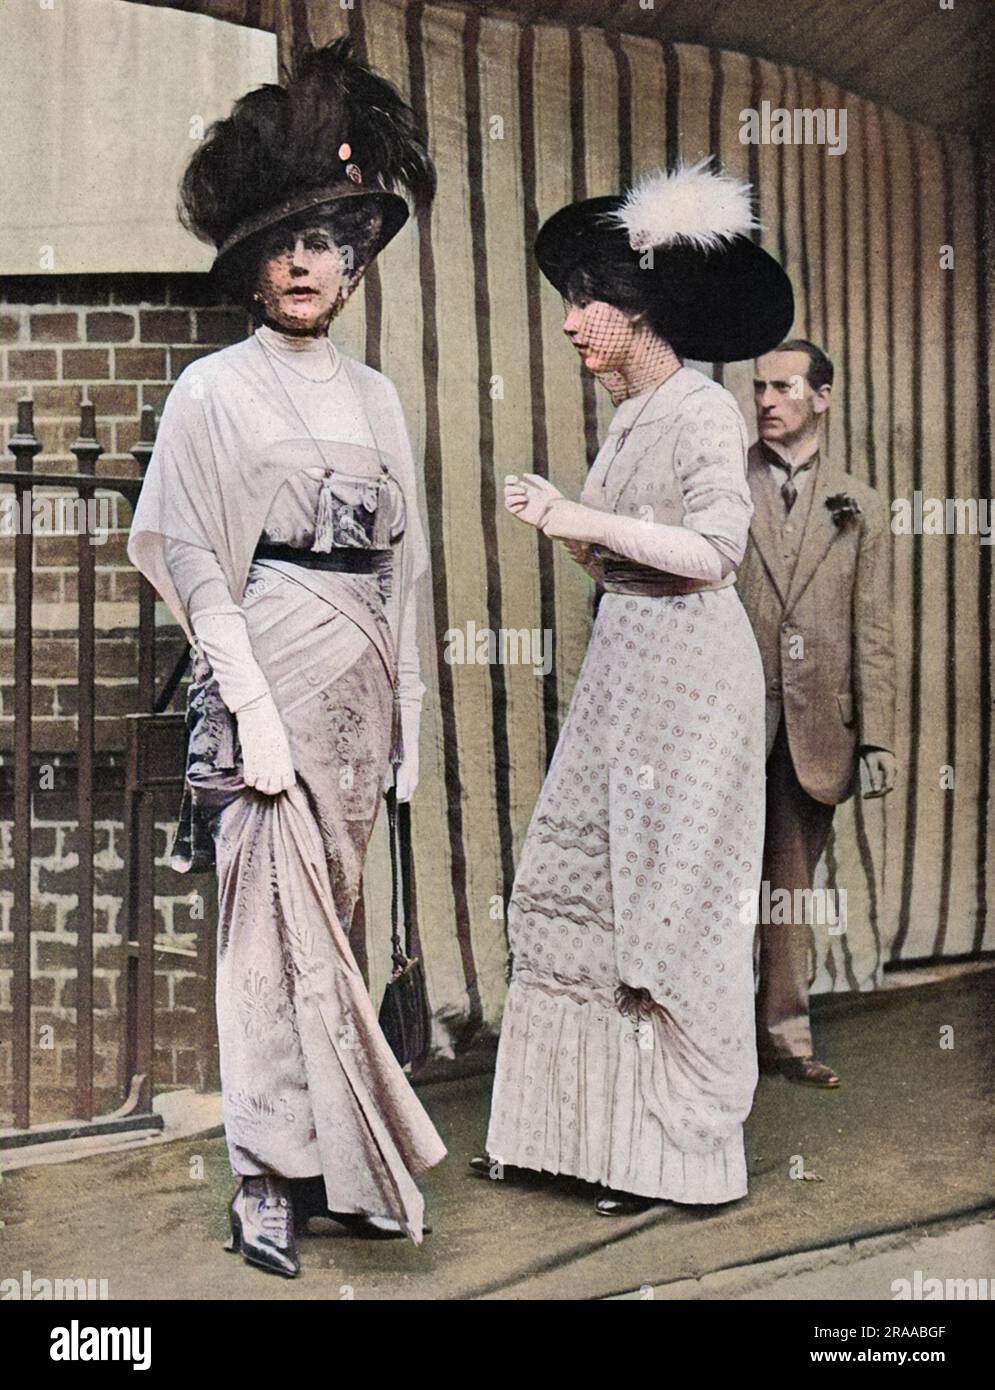 Alice Keppel, mistress of King Edward VII, pictured with her debutante daughter, Violet (later Trefusis).  The Tatler reports that Mrs Keppel threw a 'wonderfully successful ball' at the beginning of the season, succeeding in getting many distinguished men to attend who were usually not seen at such functions.     Date: 1912 Stock Photo